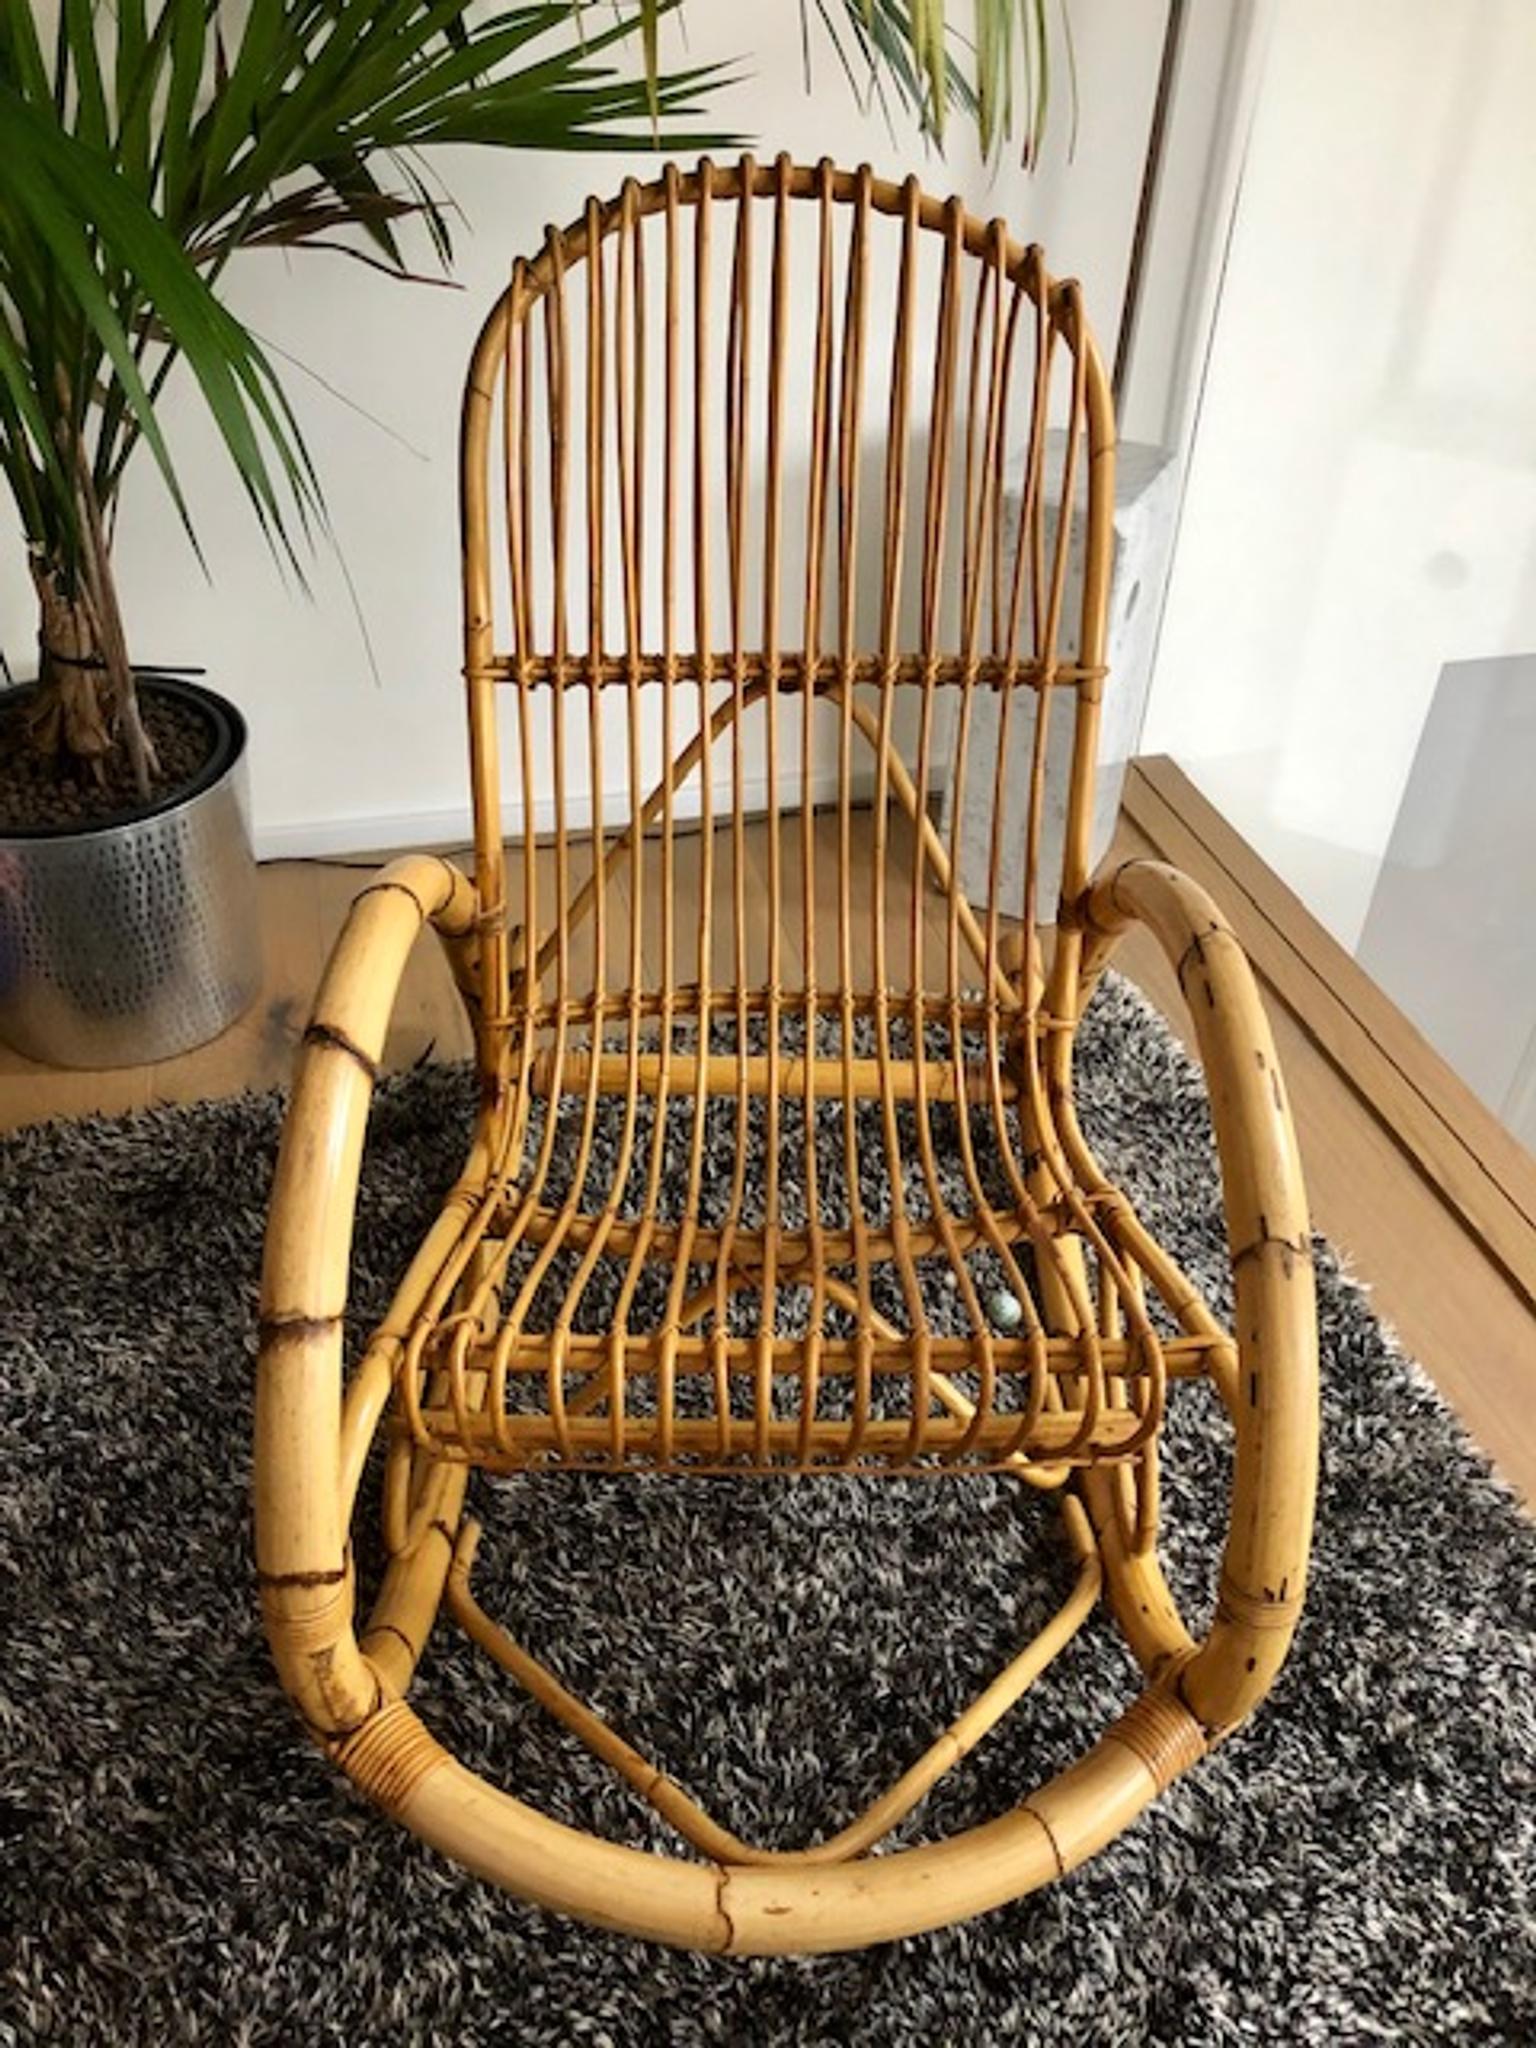 Bent Bamboo Rocking Chair By Franco Albini In Bn7 Lewes Fur 125 00